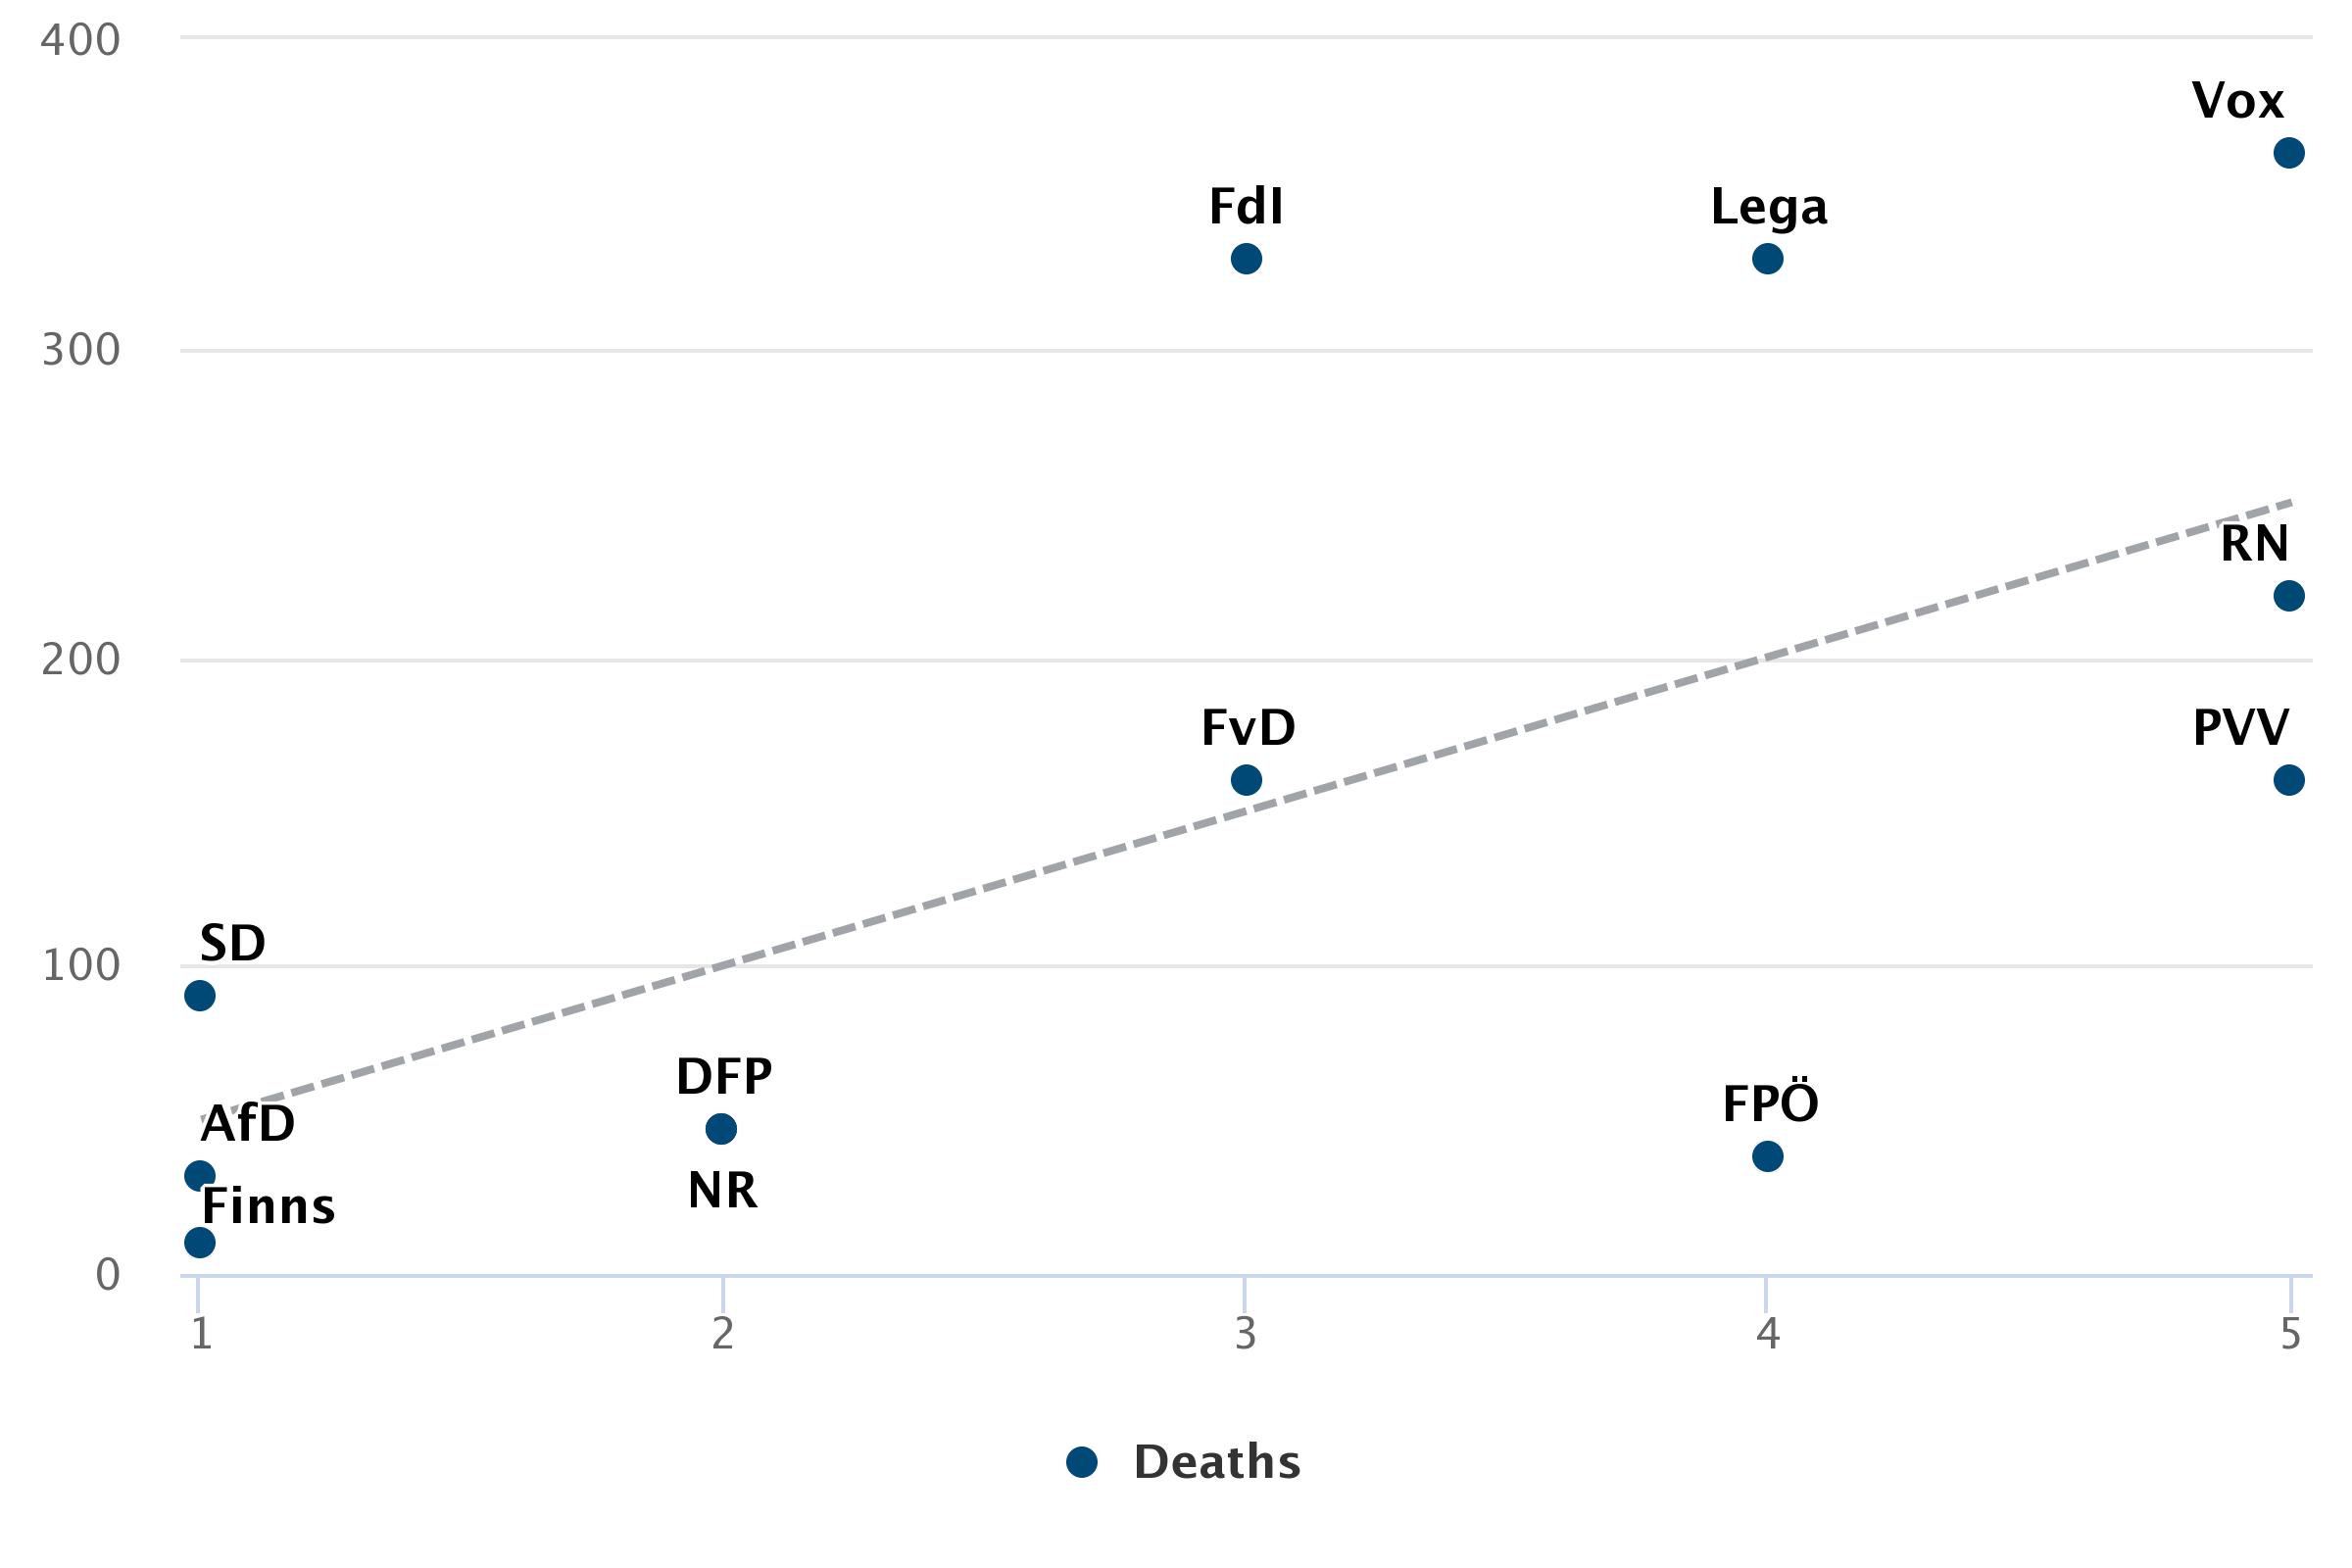 Case/death rates and party-response aggressiveness